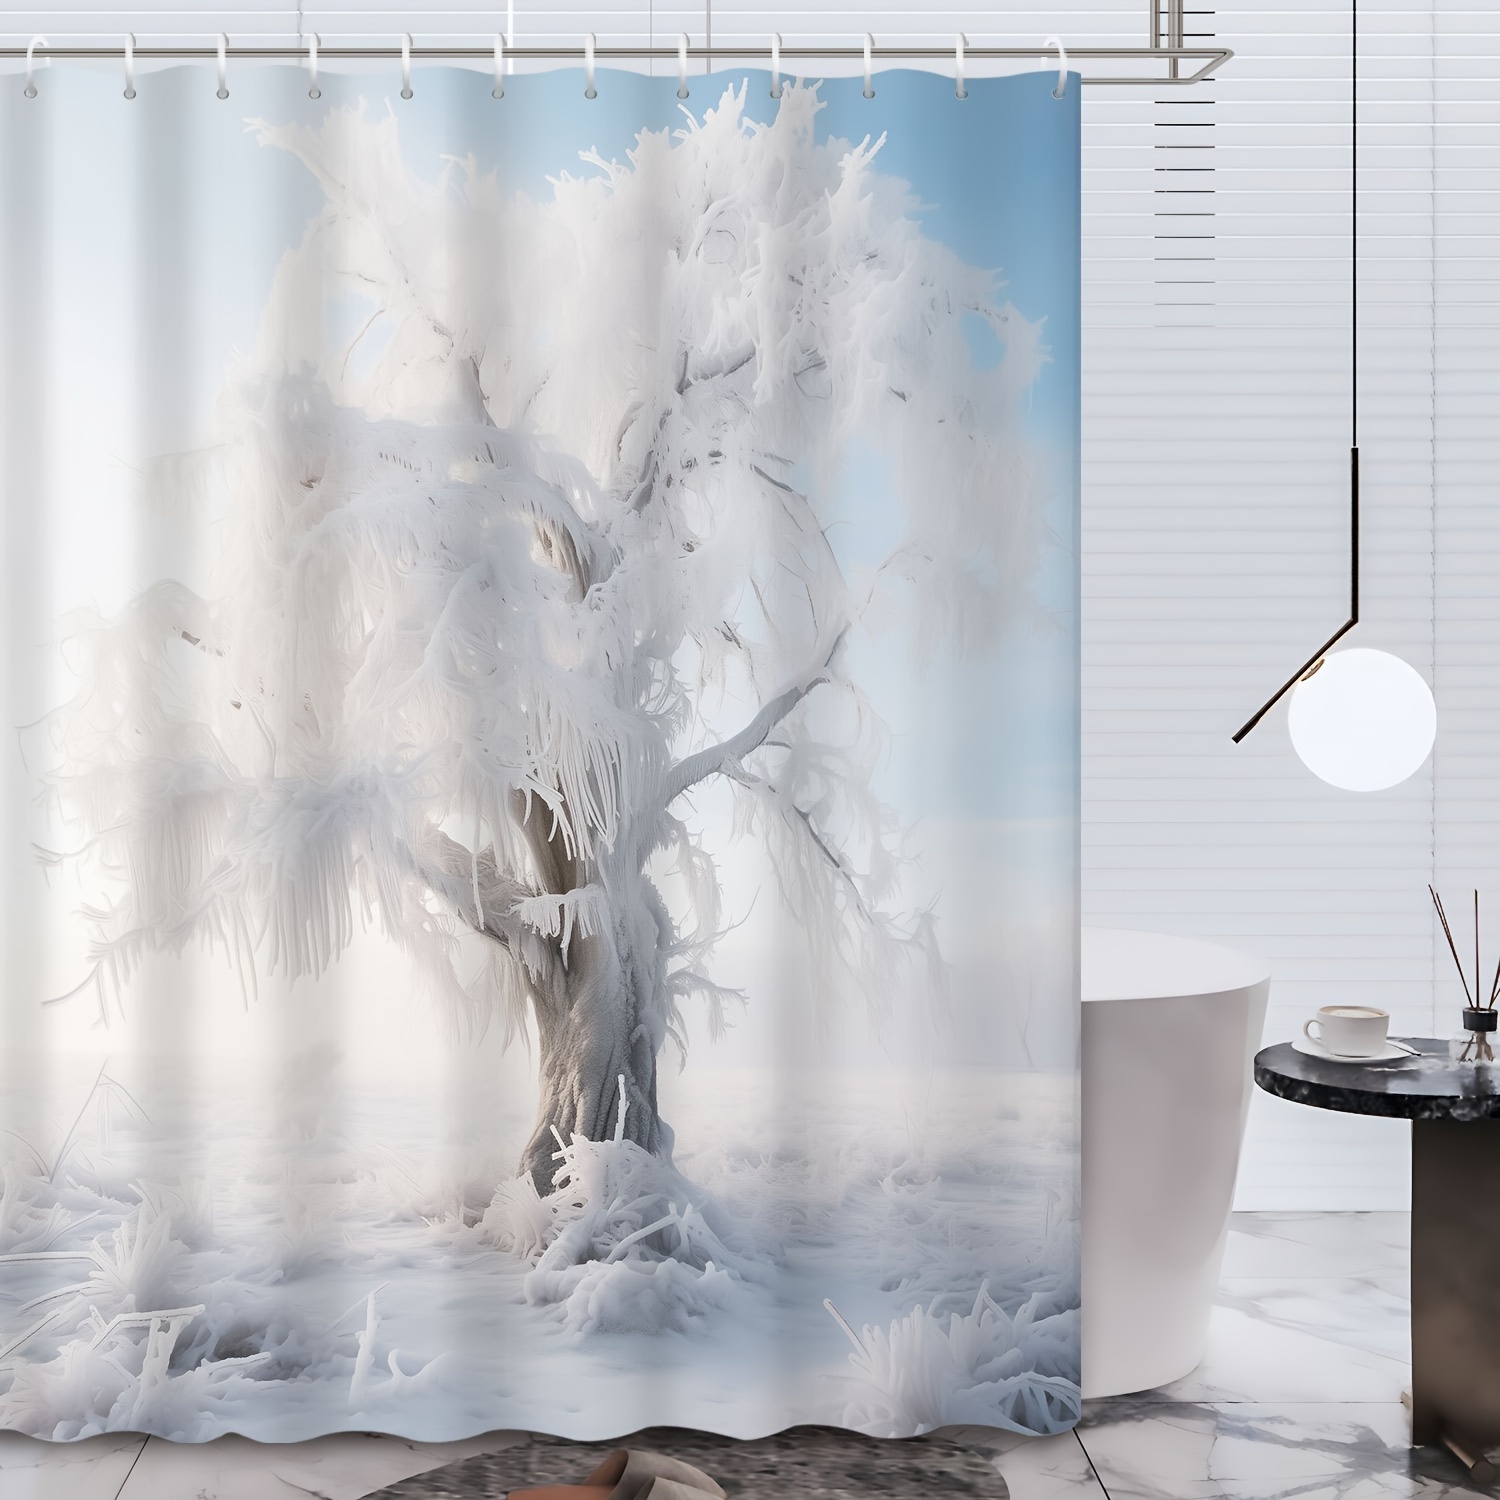 

Winter Forest White Snowy Trees Print Shower Curtain, Water-resistant Polyester Bath Curtain With Hooks, Machine Washable, Grommet Top, For Bathroom Decor, Wall Tapestry - 72x72 Inches